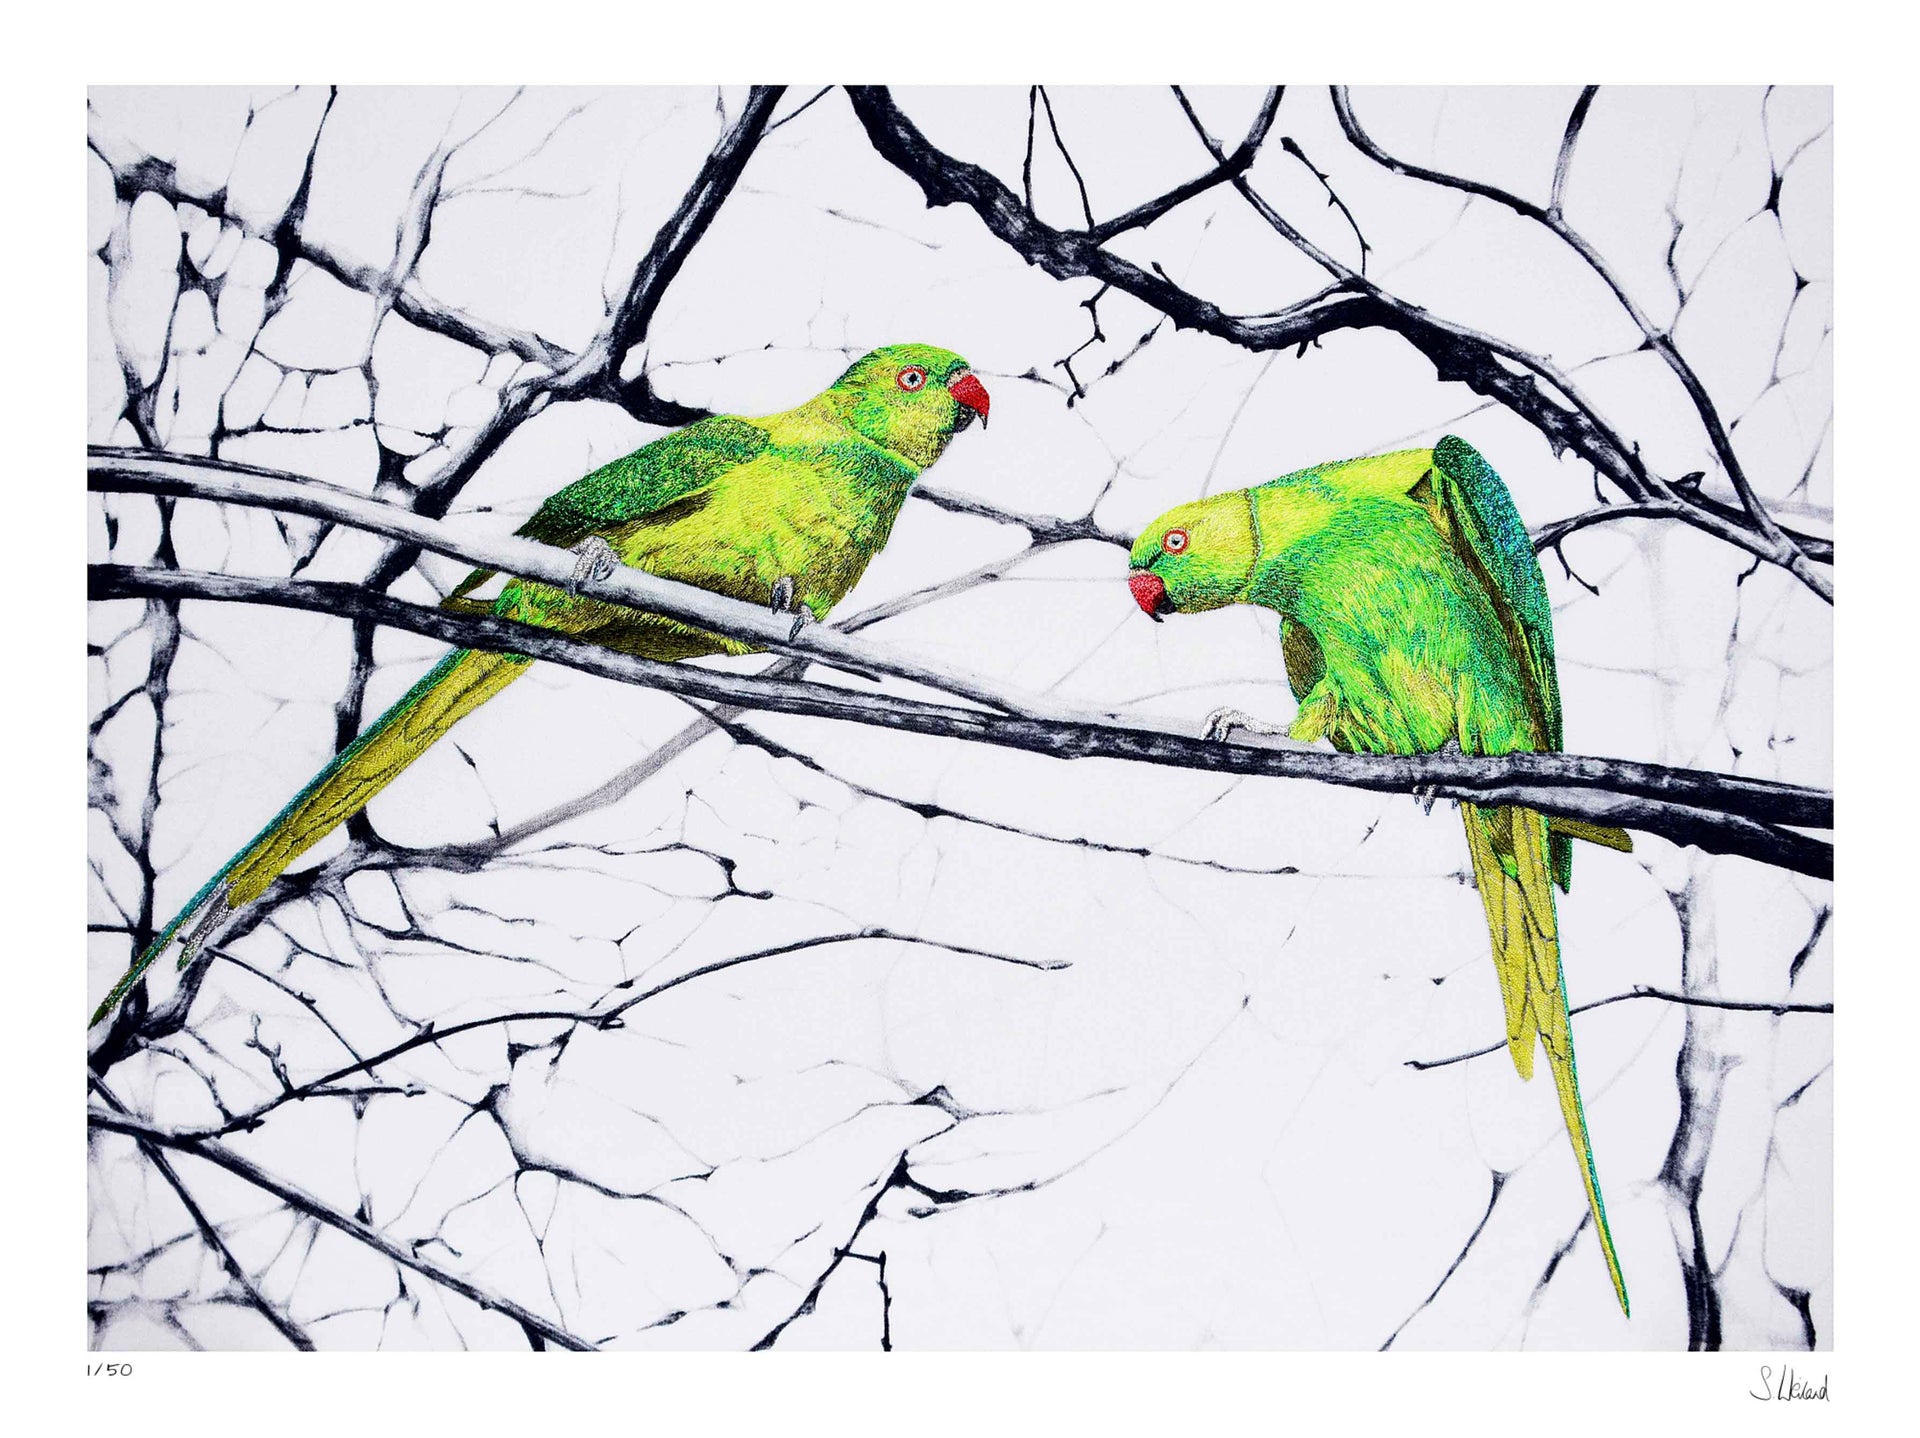 Hand embroidered hyde park parakeets limited edition print